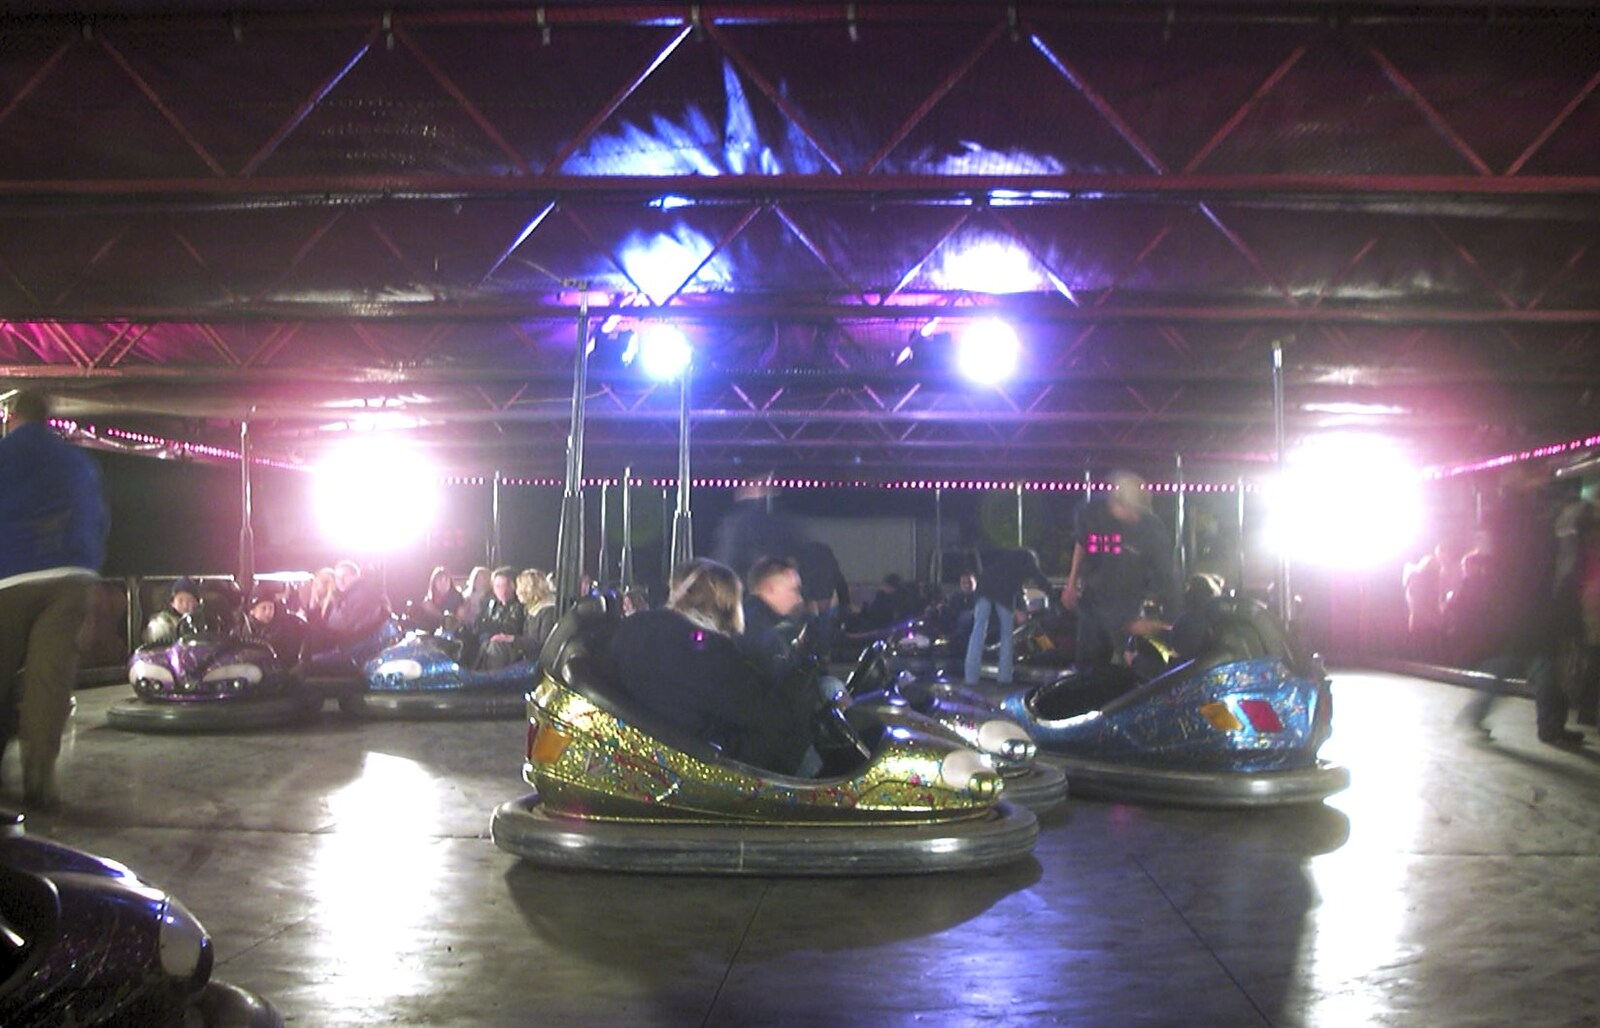 On the Dodgems from Fireworks and Fairgrounds with Mikey P, Fair Green, Diss, Norfolk - 5th November 2003